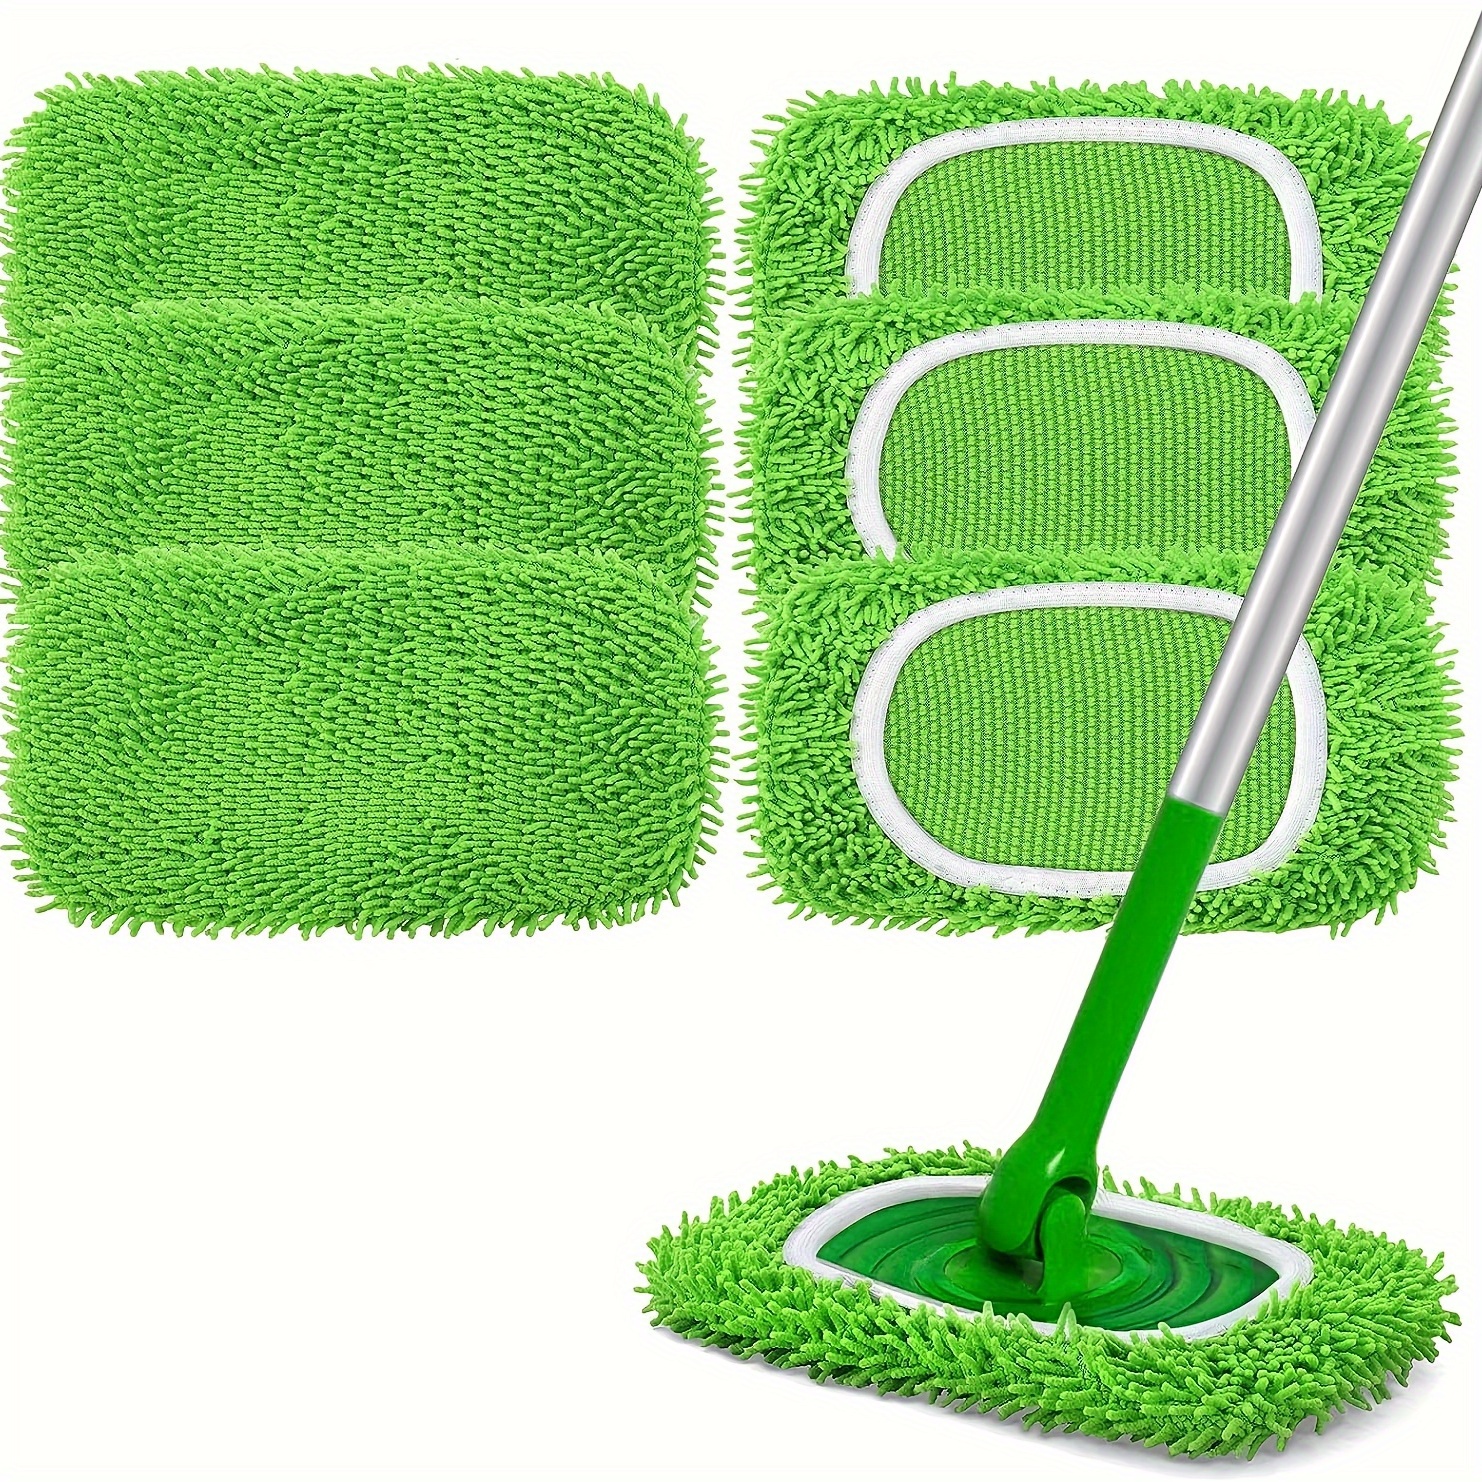 

Soft Bristle Car Wash Mop - Gentle On Paint, Extendable Handle For Easy Reach, Ideal For Auto Detailing & Cleaning